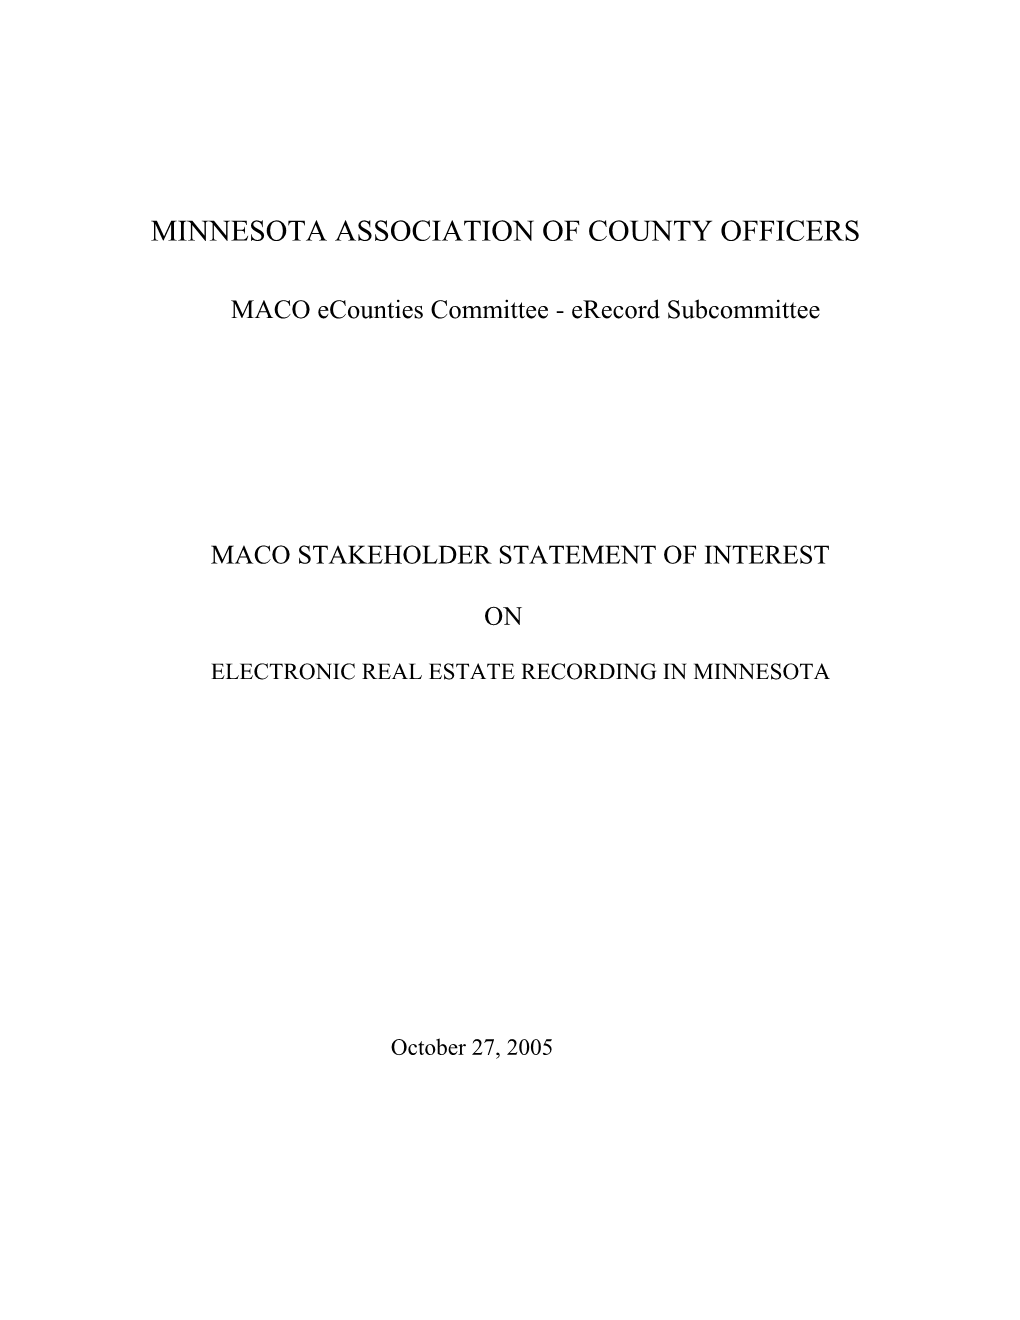 Minnesota Association of County Officers Ecounties Committee